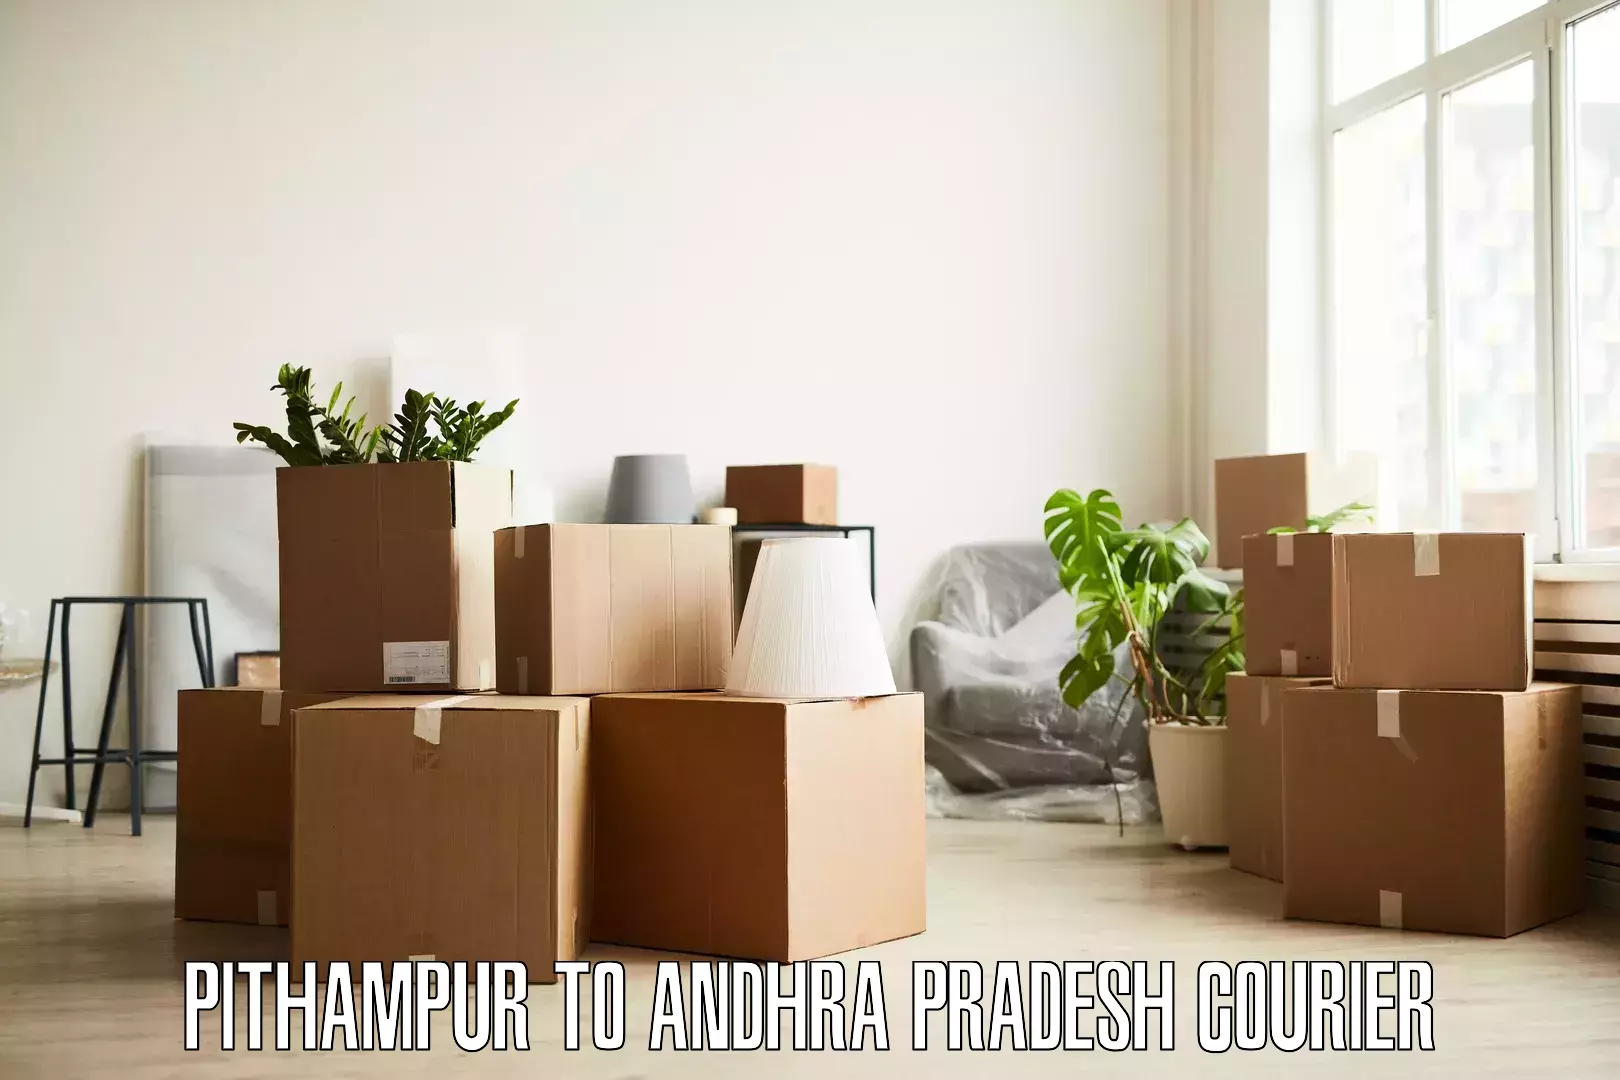 Furniture delivery service in Pithampur to Yerravaram